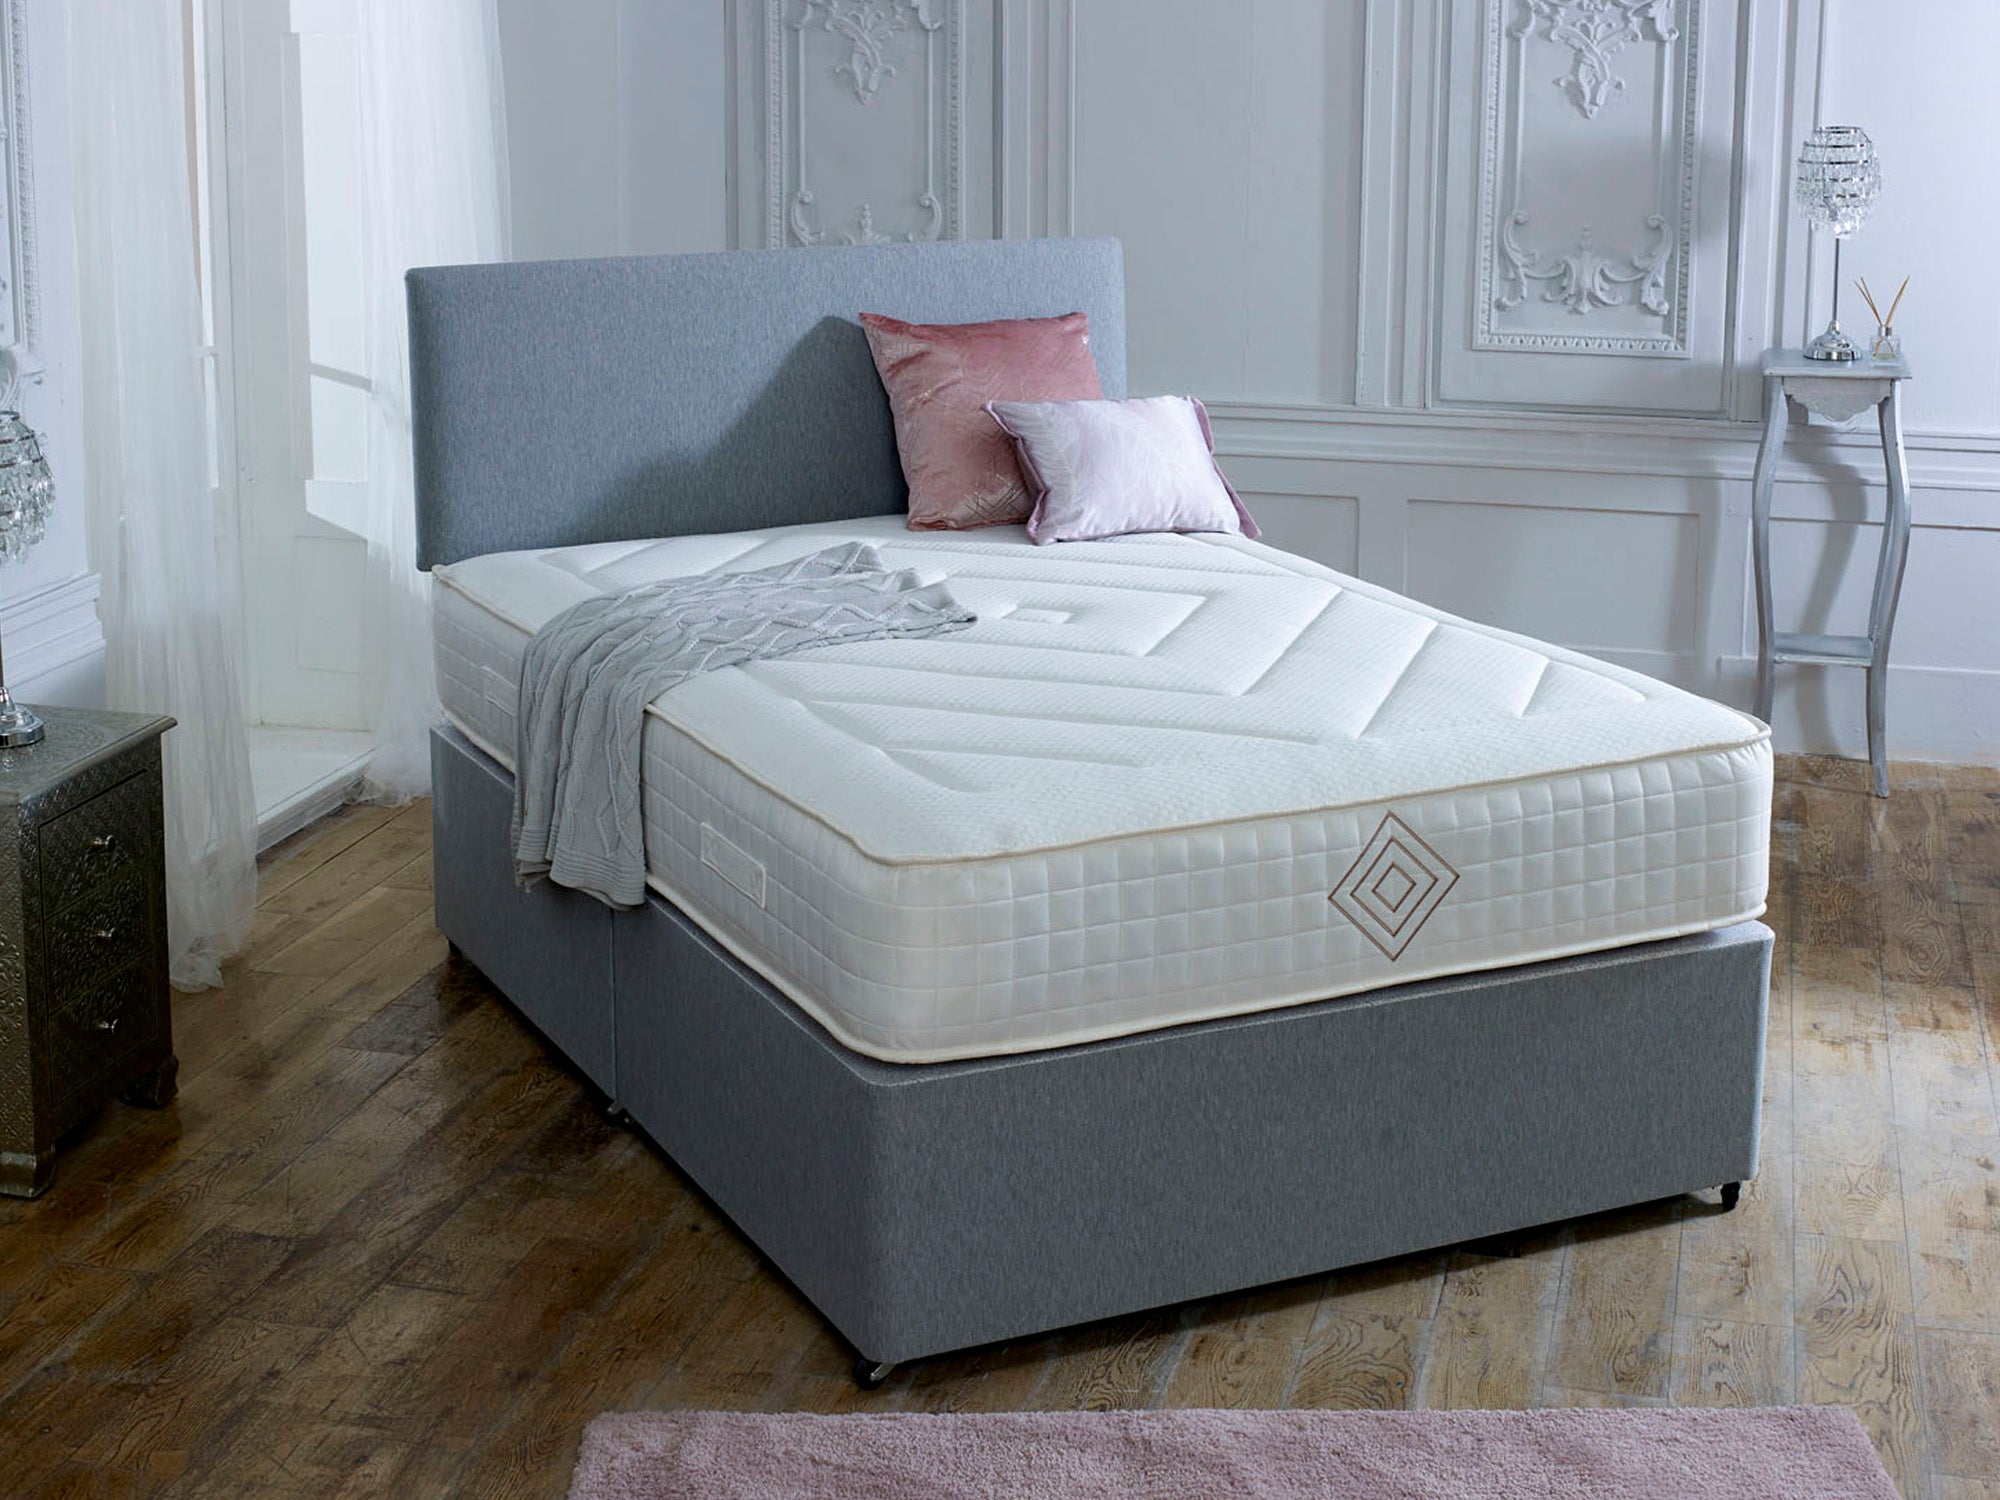 double pocket sprung mattress with memory foam topper